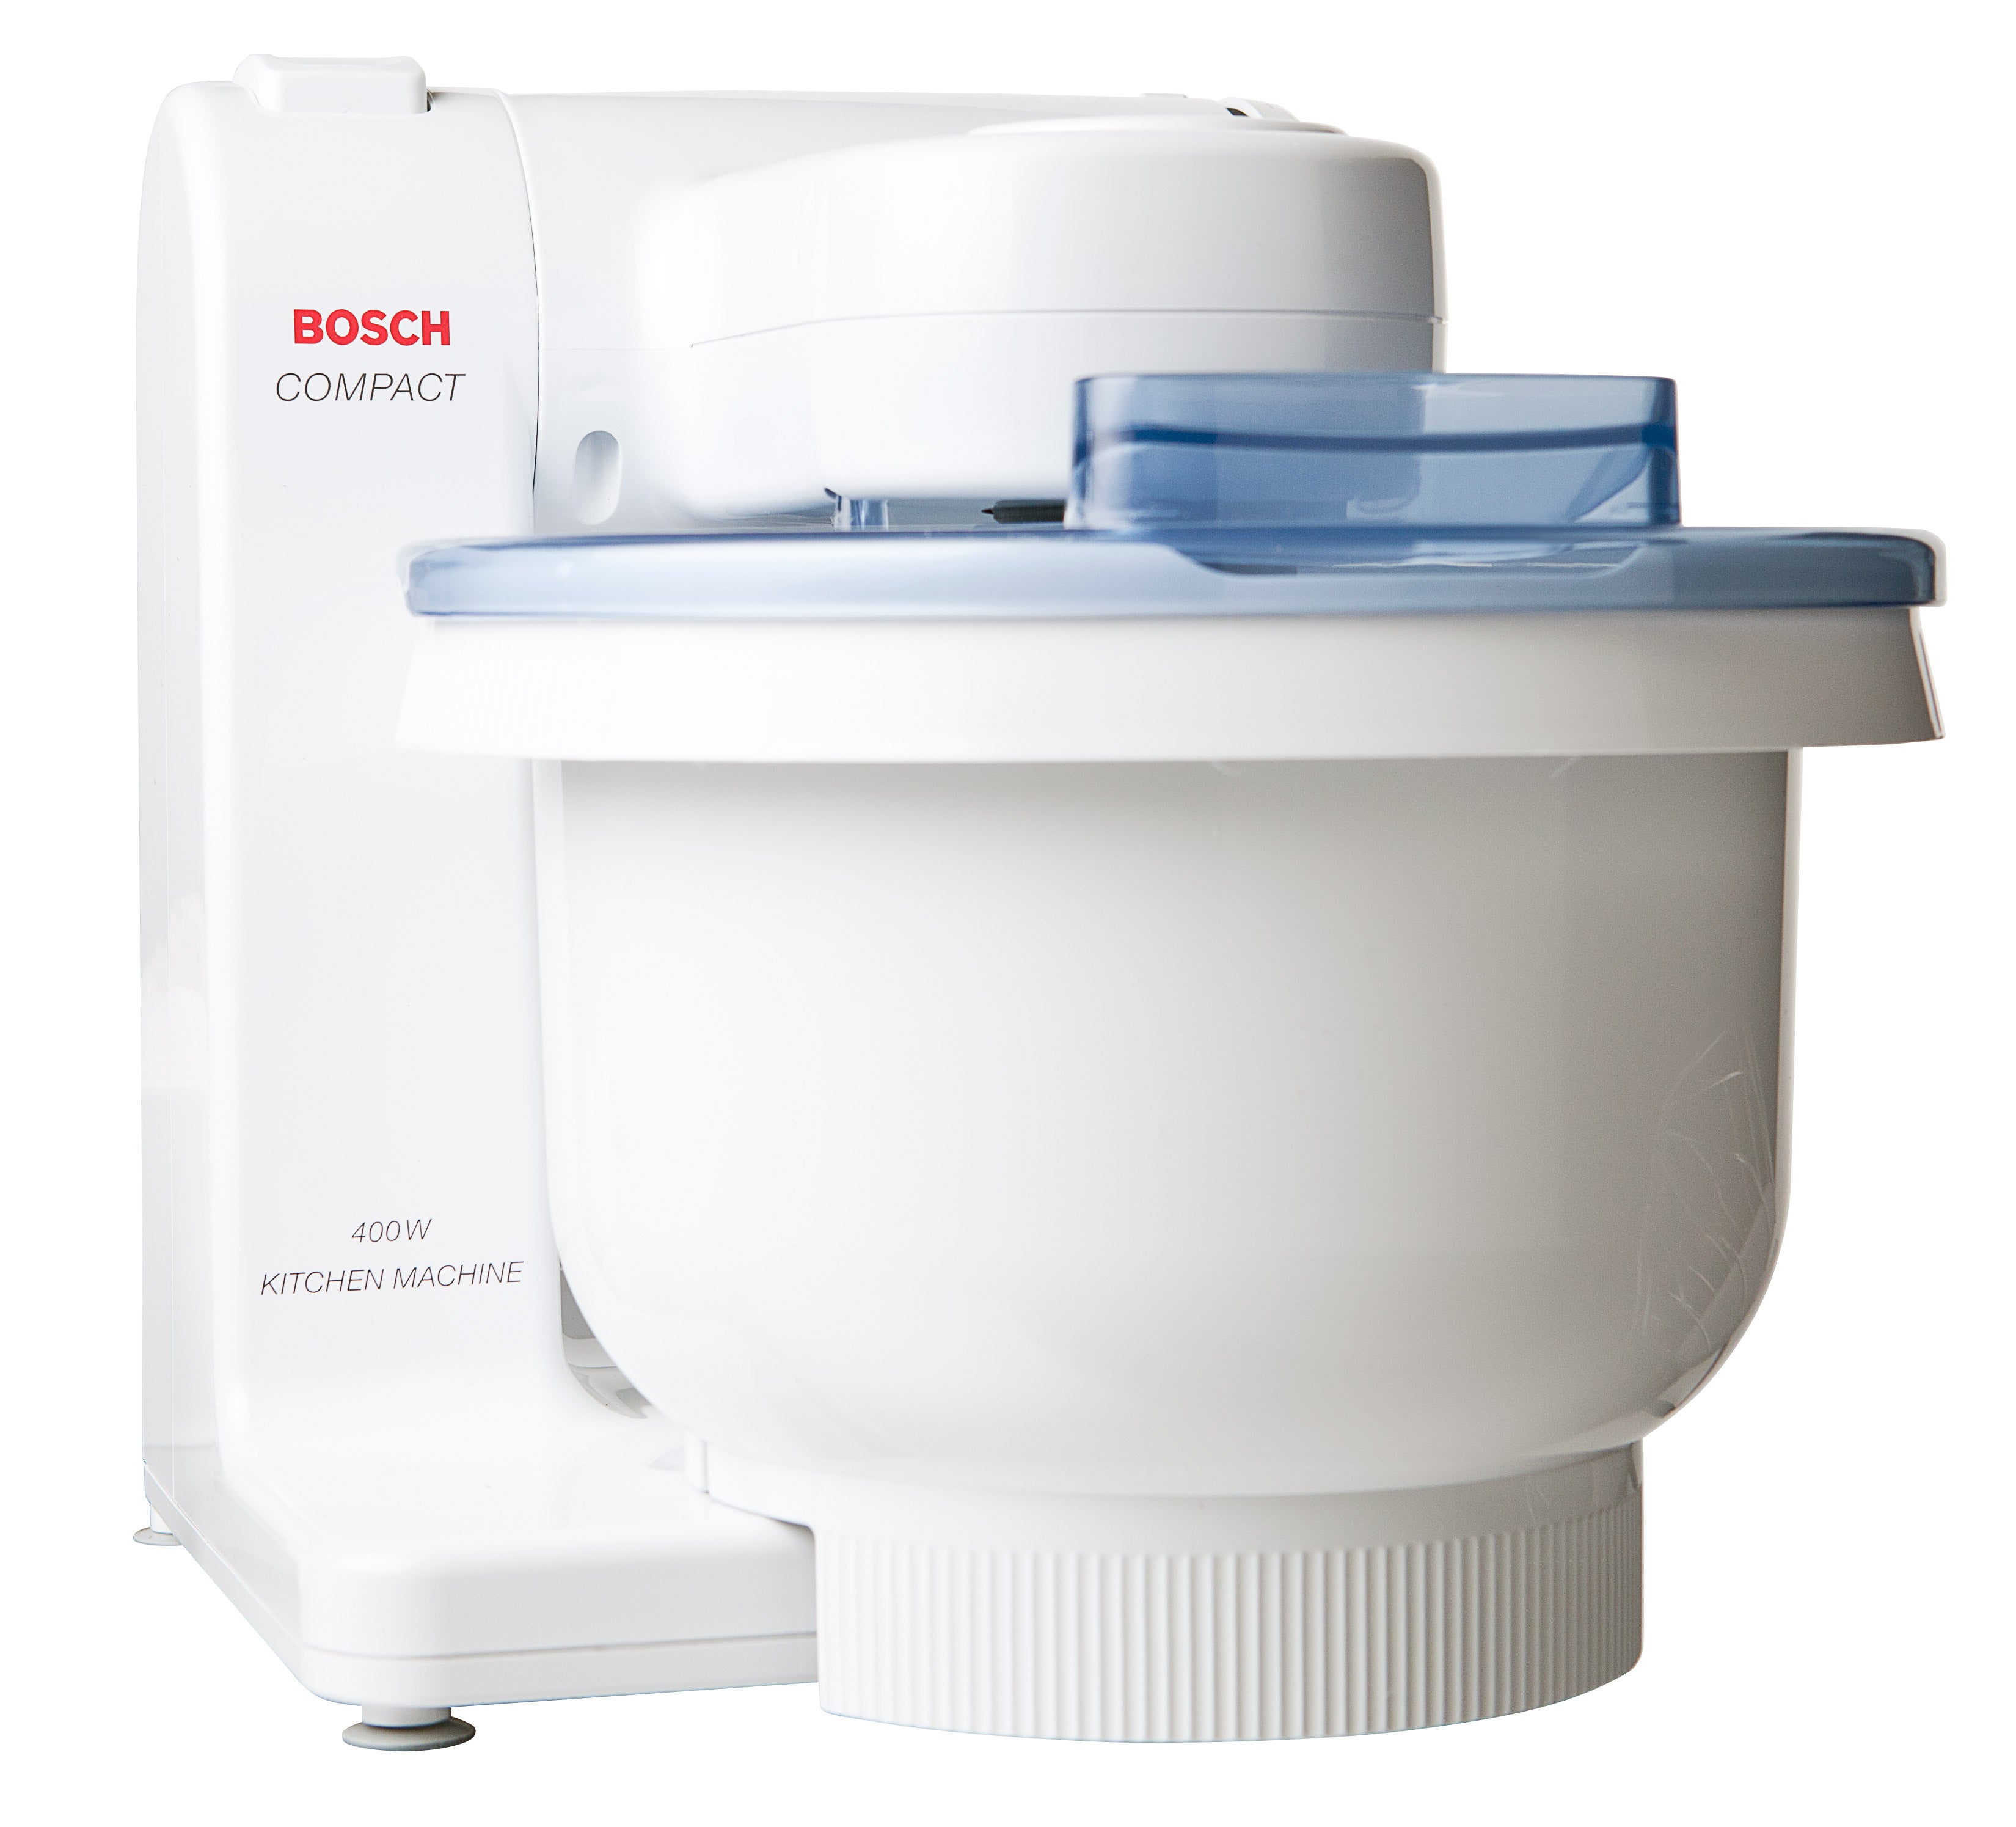 BOSCH Compact Stand Mixer mum4405 - Out Of Stock No longer Available